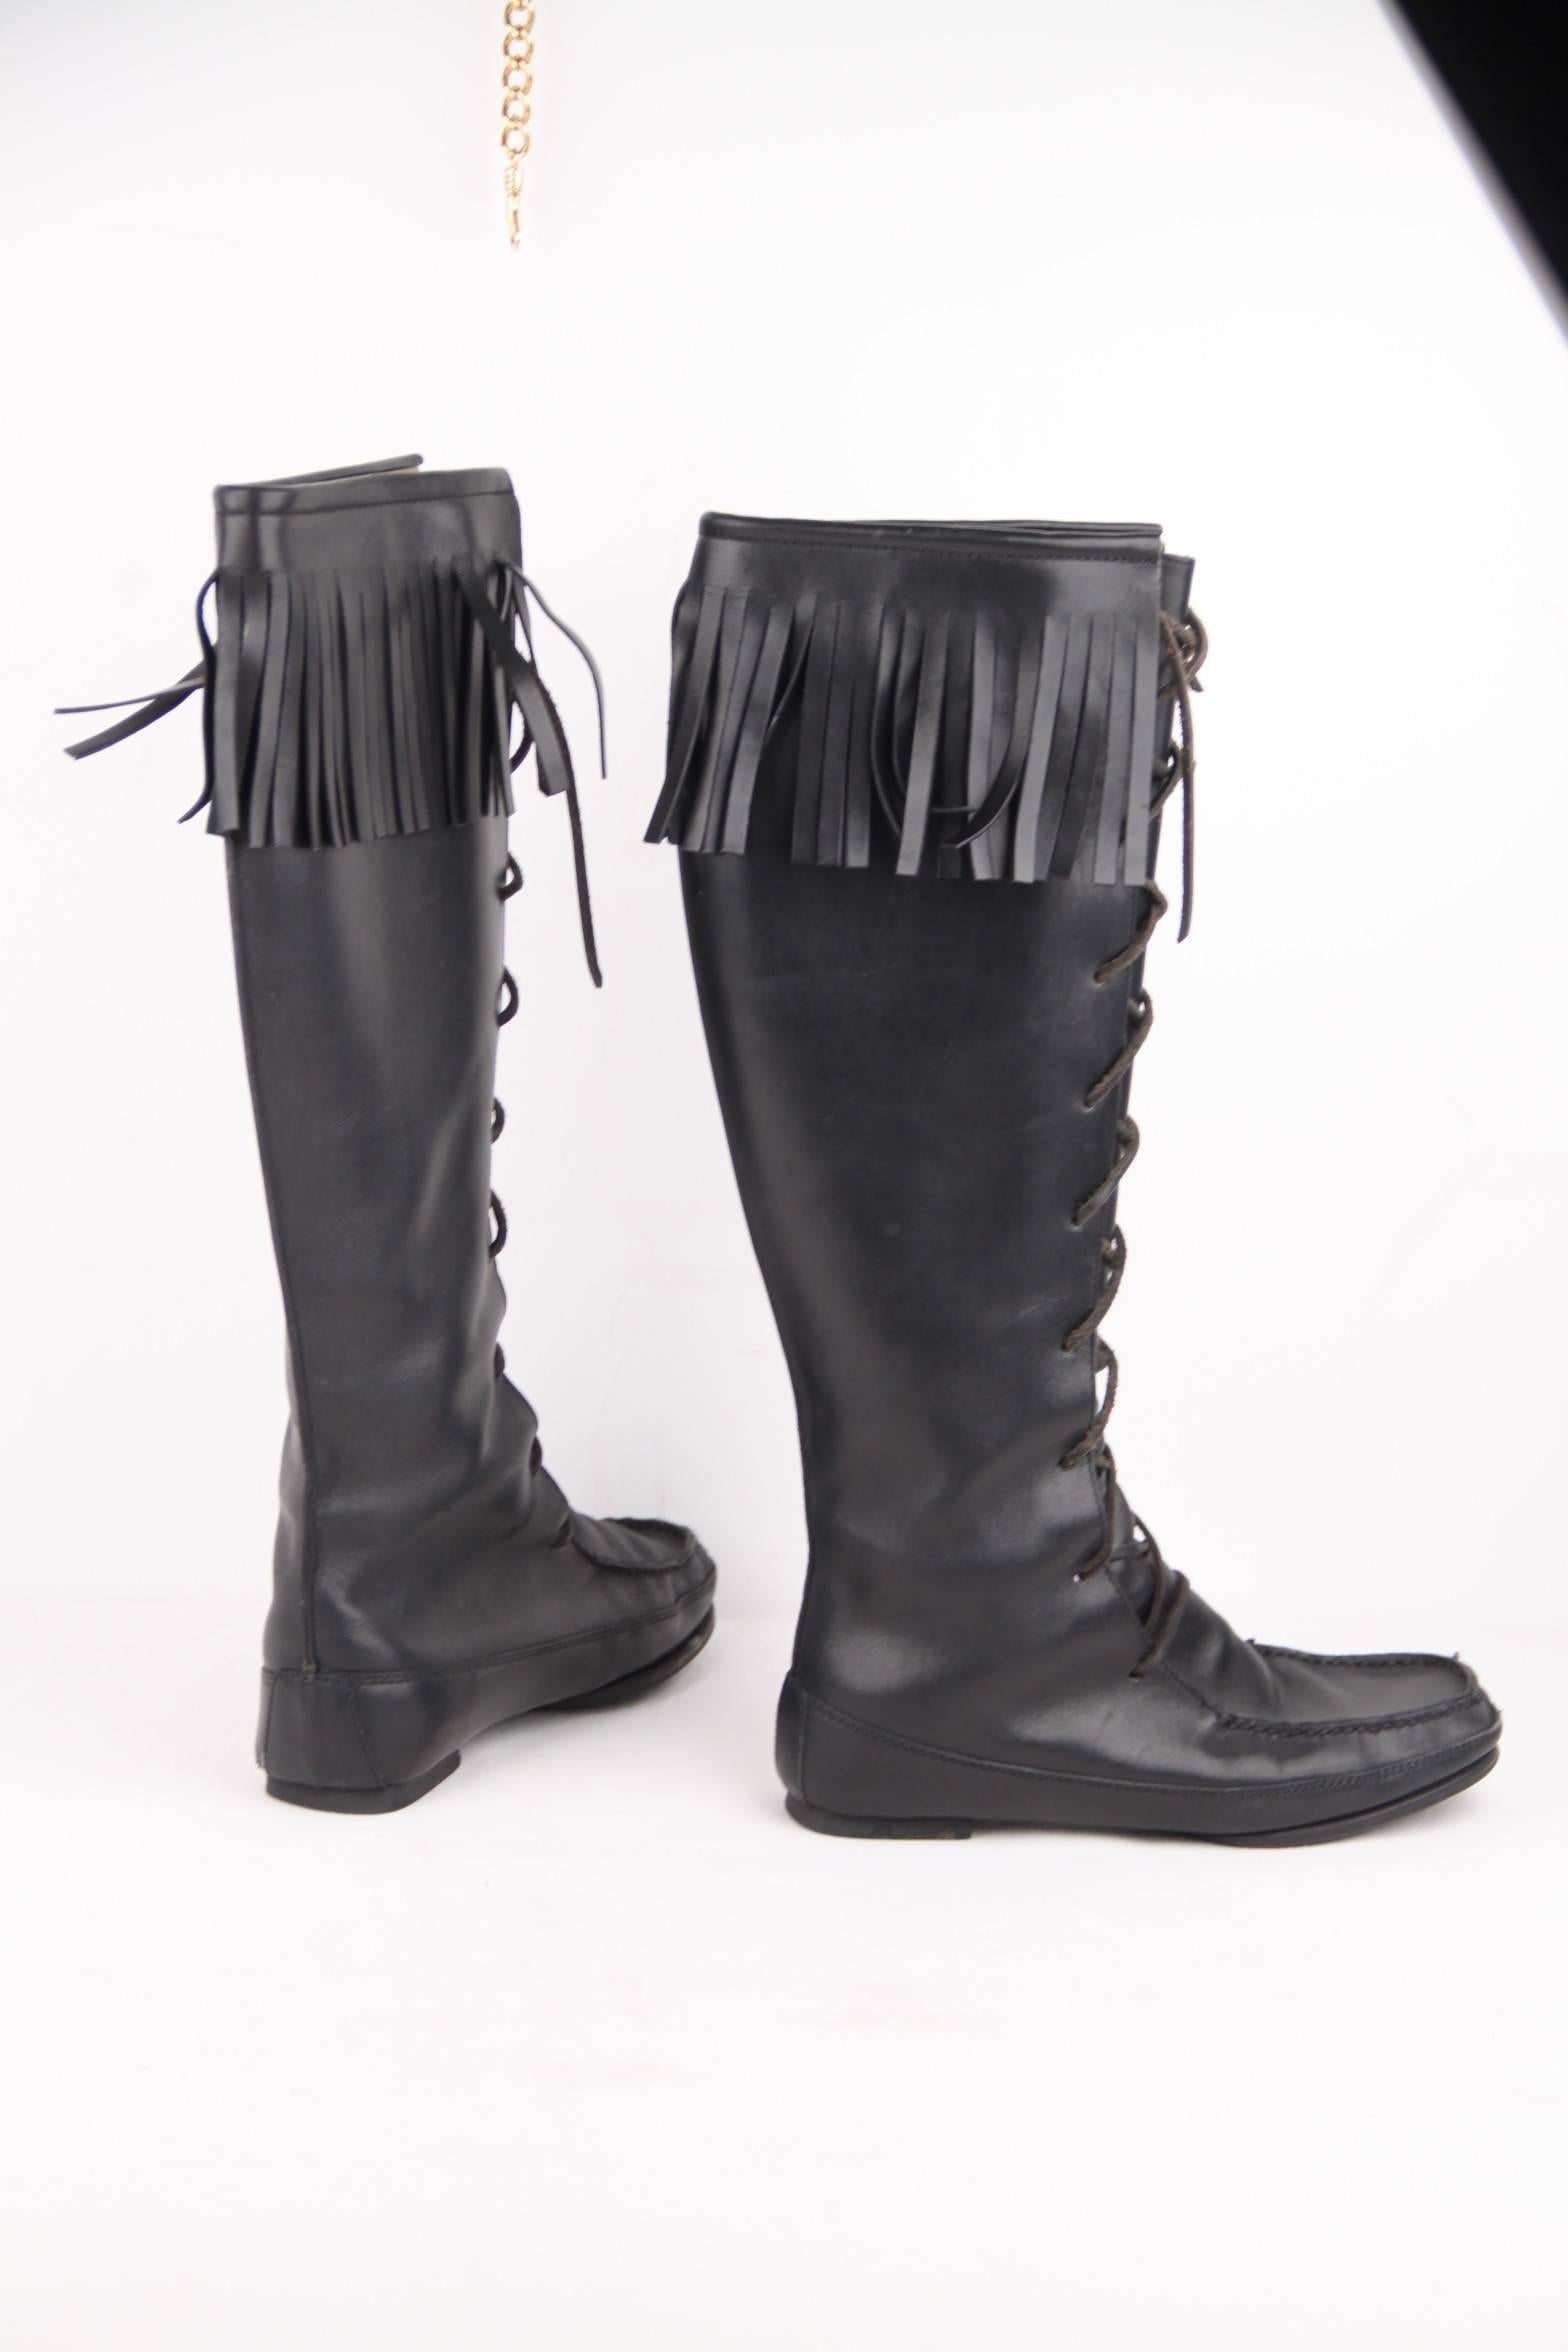 - Gucci black leather knee high pull-on moccasin style boots

- Lace-up front

- Fringed detail on the leg opening

- Leather outer and inner

- 'Vibram' rubber heel and partial rubber sole

- Size: 37 1/2 C (The size shown for this item